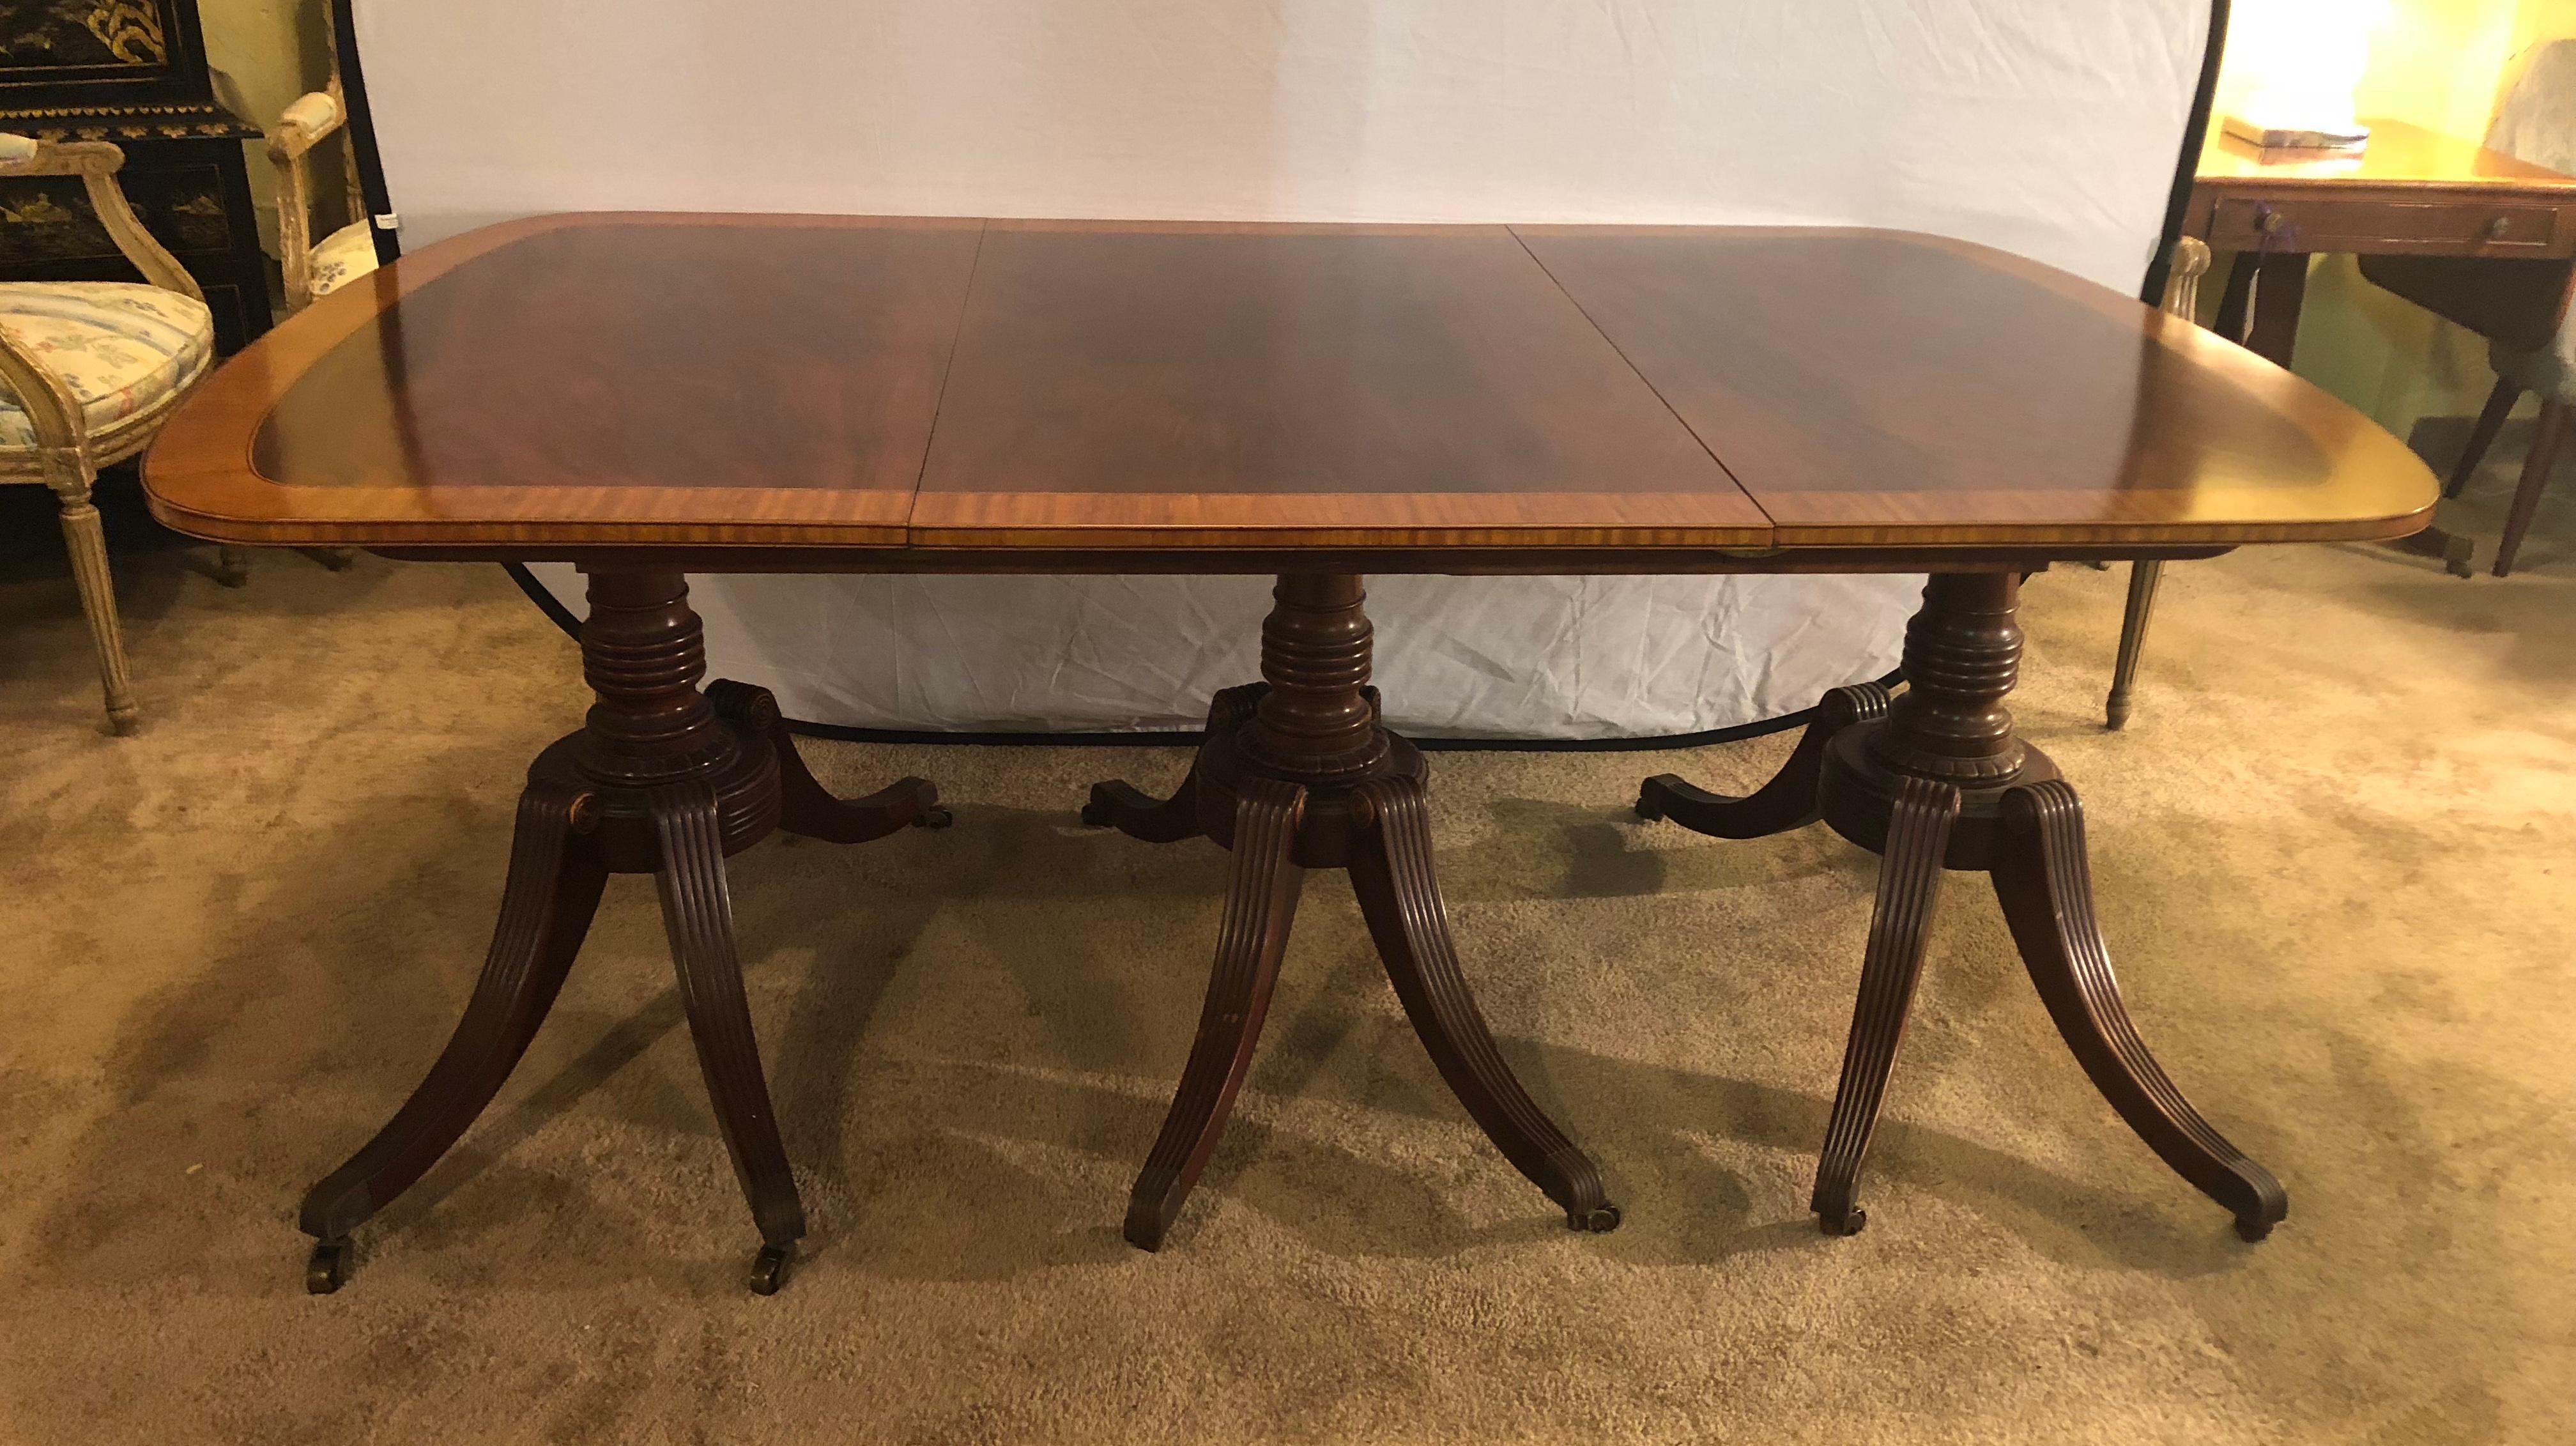 20th Century Georgian Style Crotch Mahogany Triple Pedestal Dining Table with Four Leaves